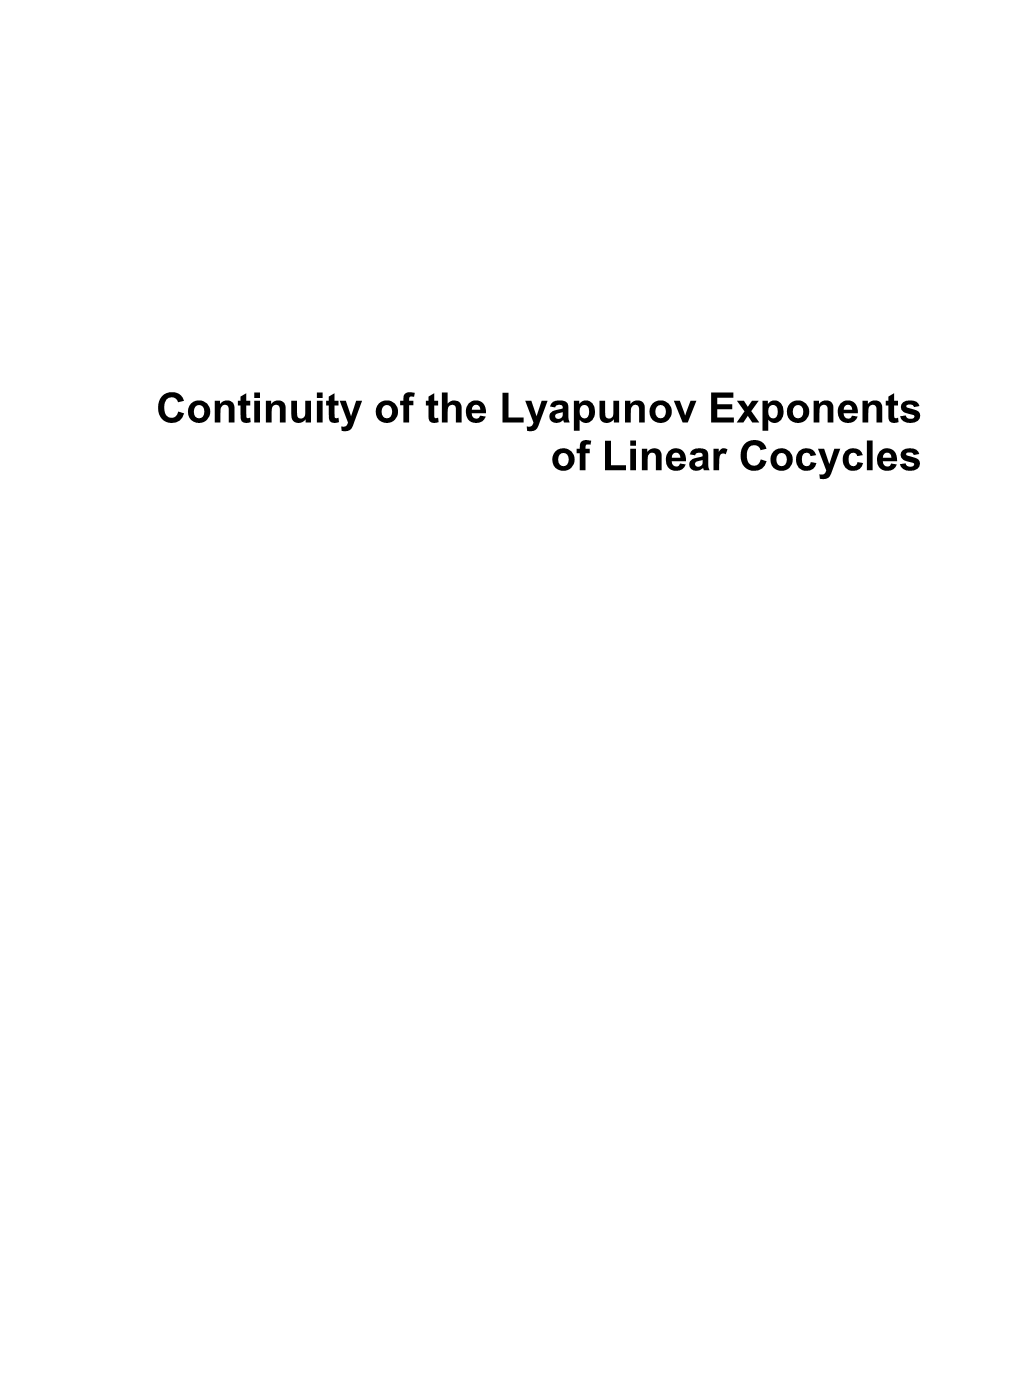 Continuity of the Lyapunov Exponents of Linear Cocycles